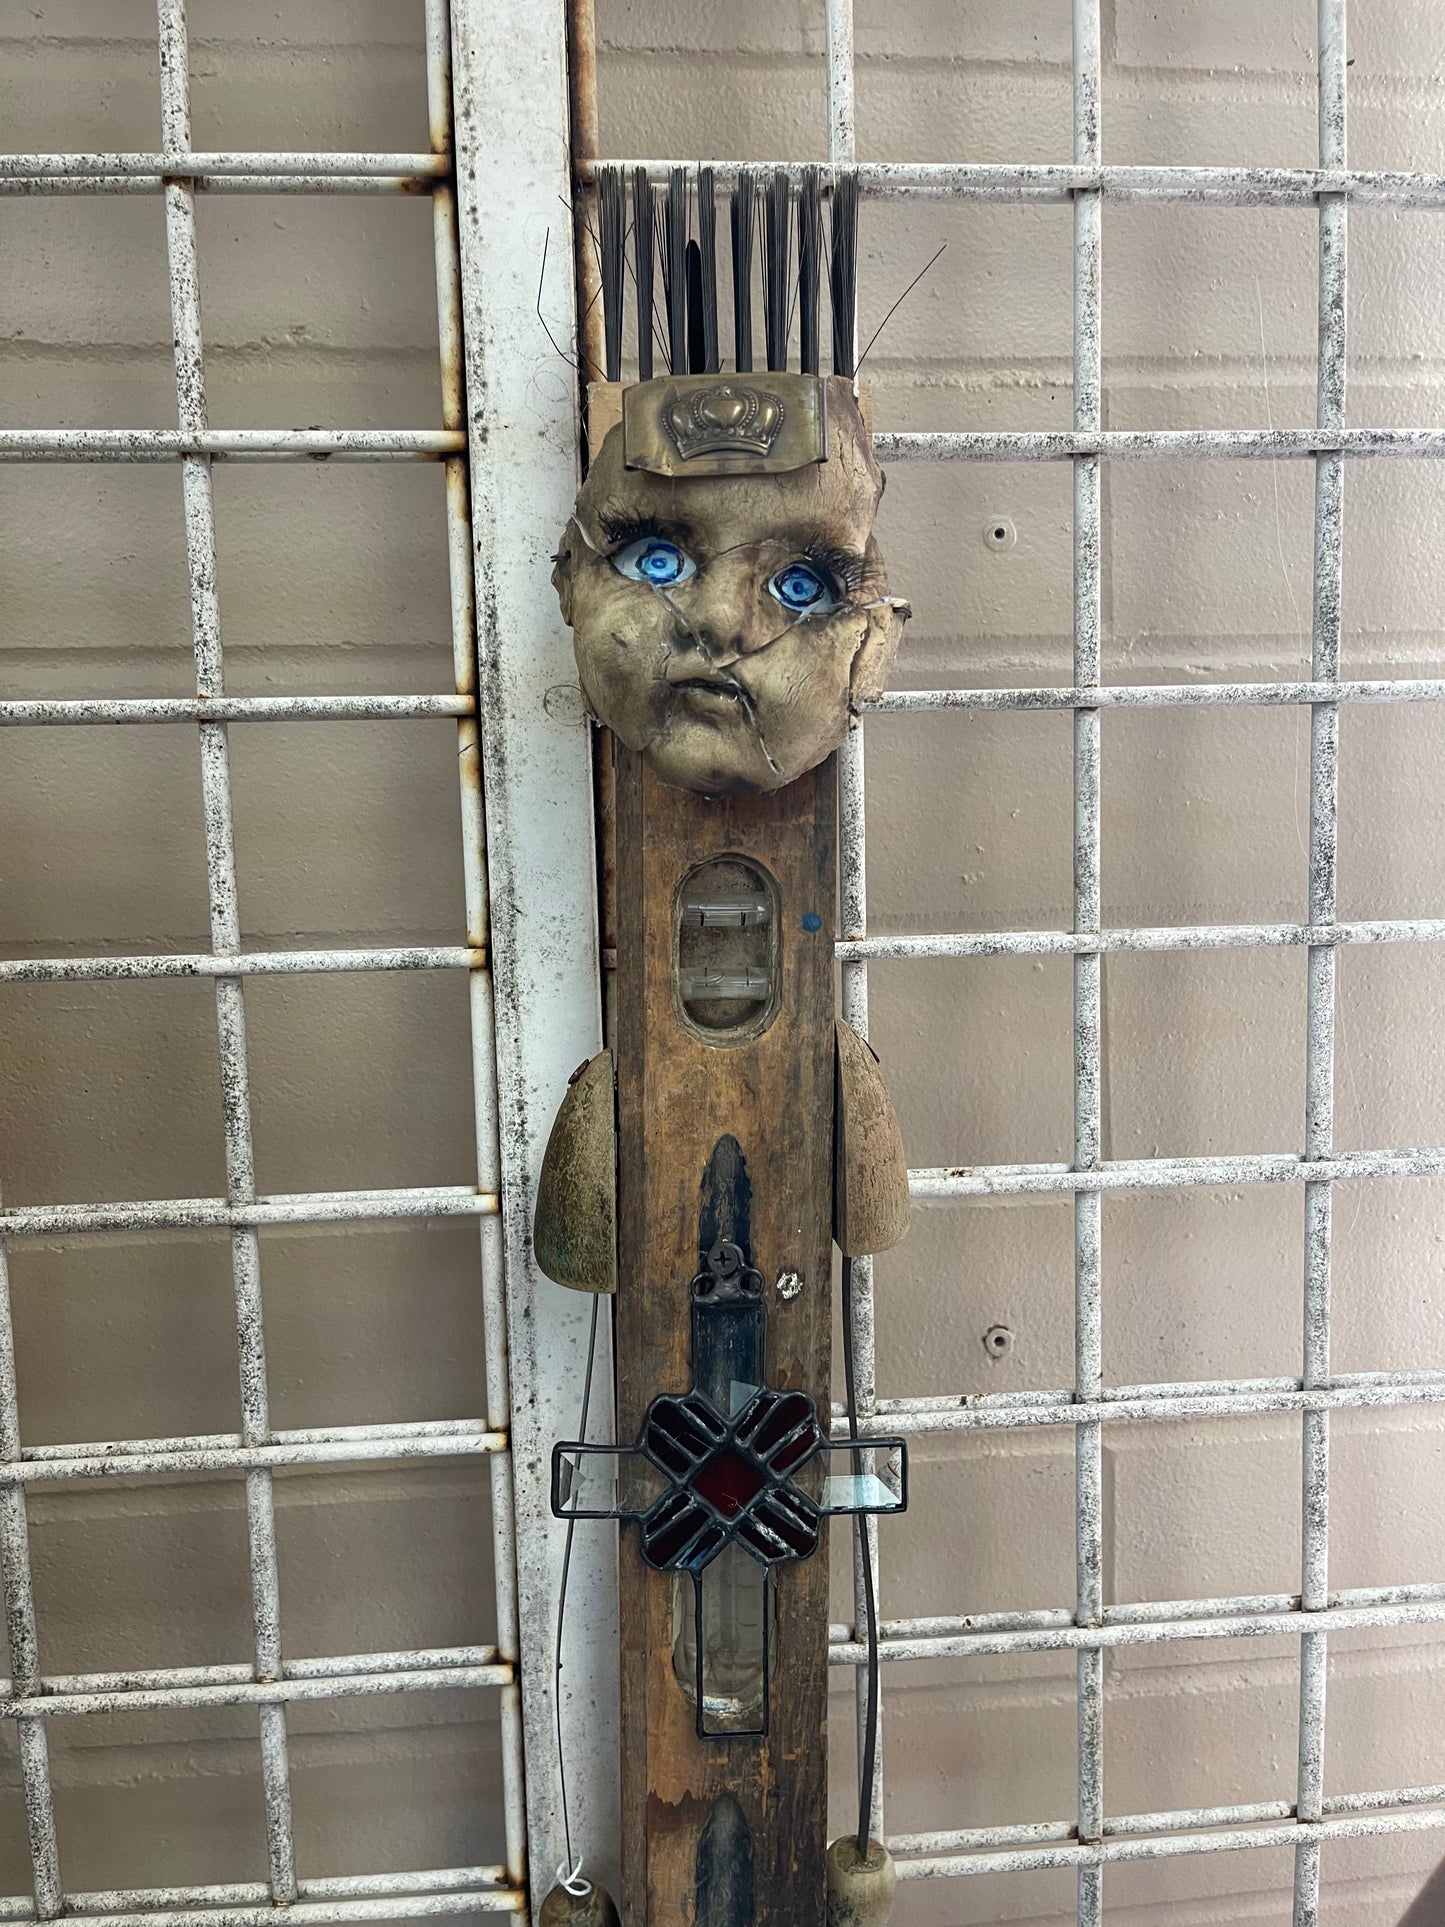 Found Art sculpture - doll head on level with fish feet